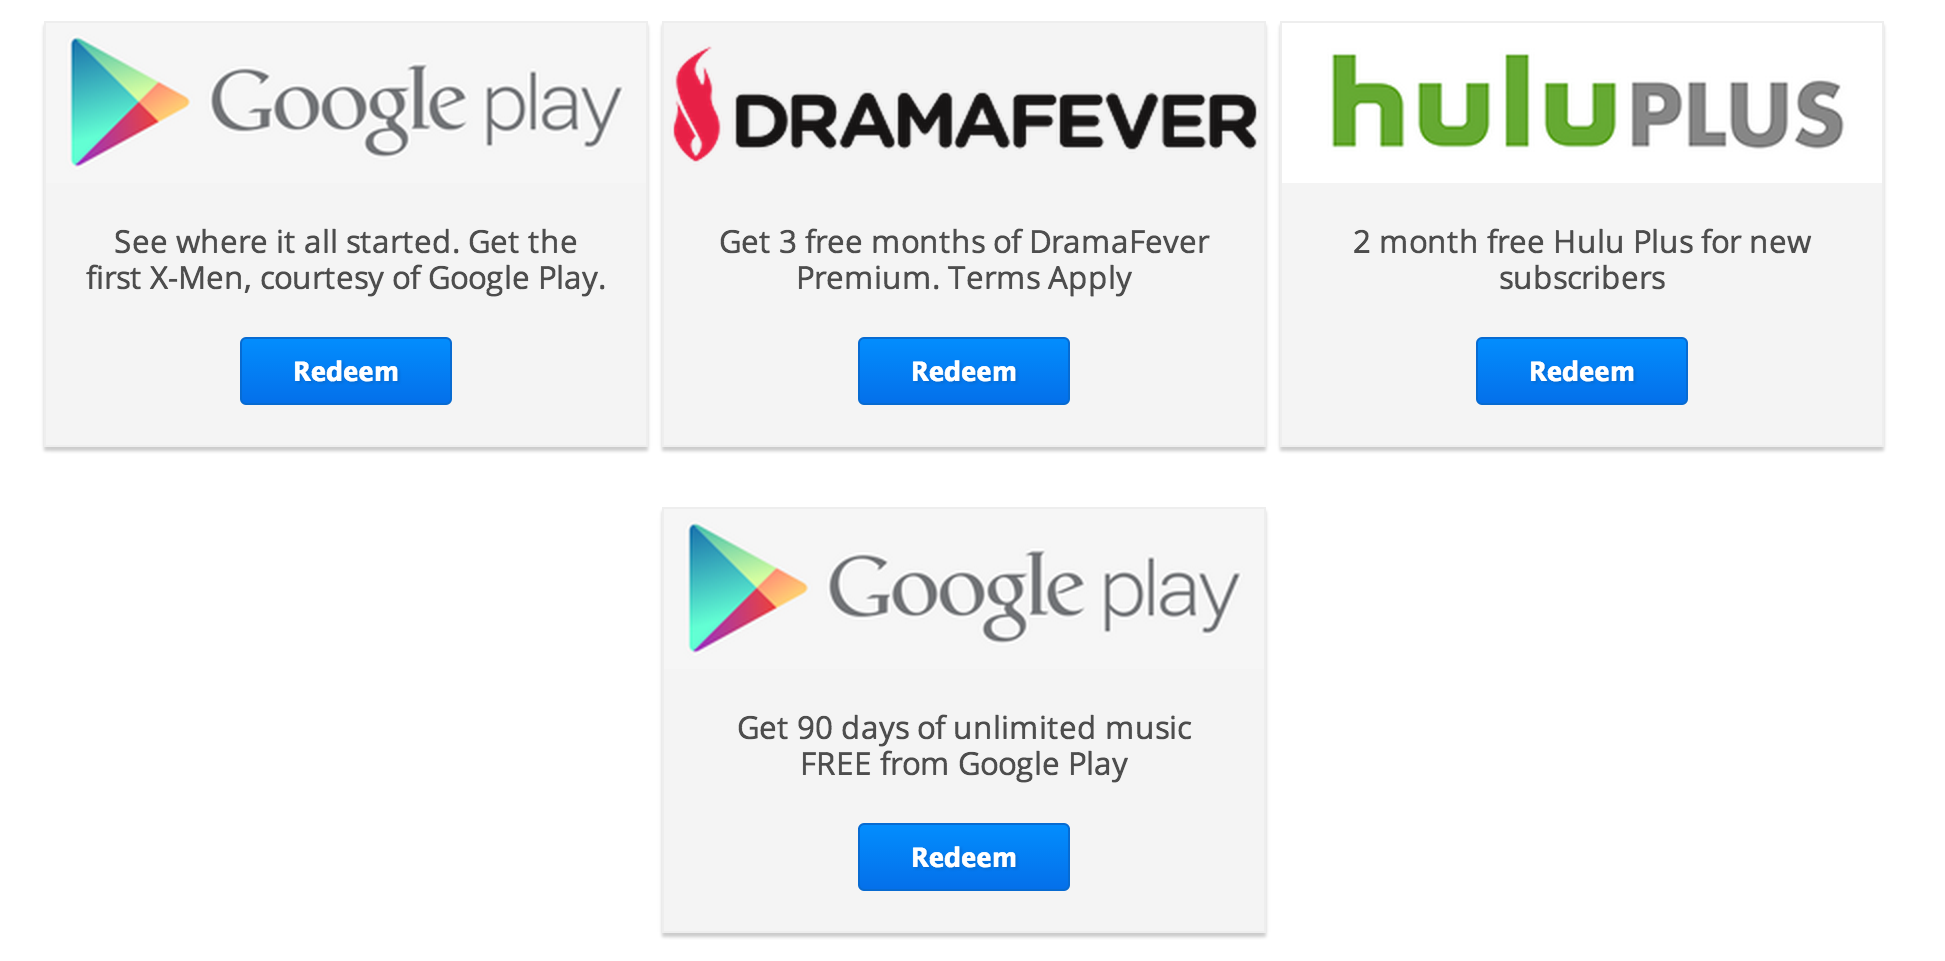 These are the offers that we received via the Chromecast in the Consumerist Cave.